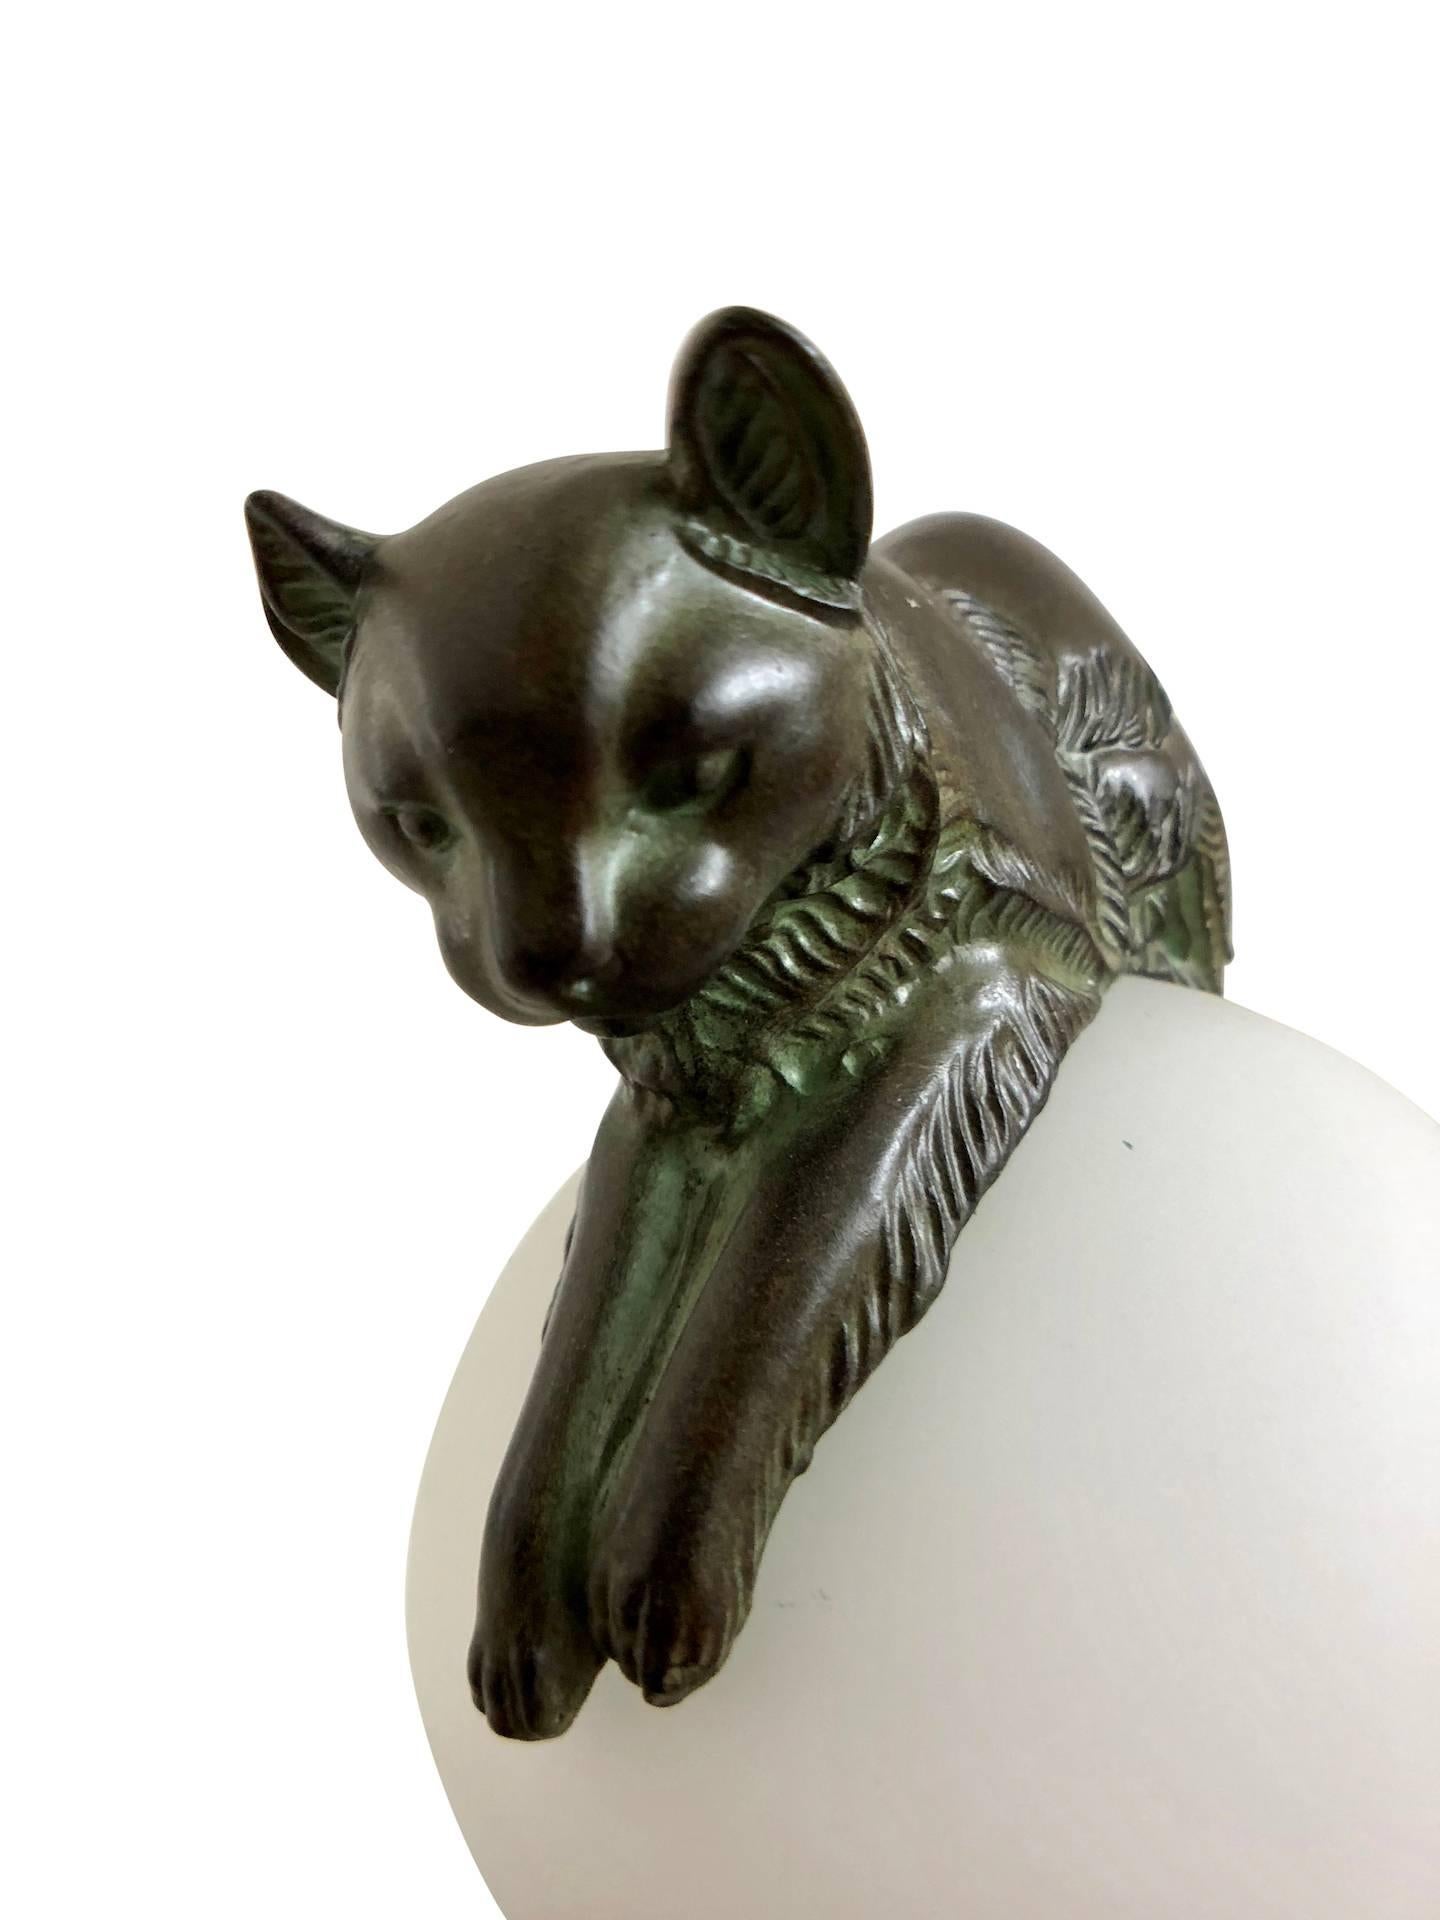 Art Deco Table Lamp, Equilibre, Cat on Glass Ball by Gaillard, Original Max Le Verrier